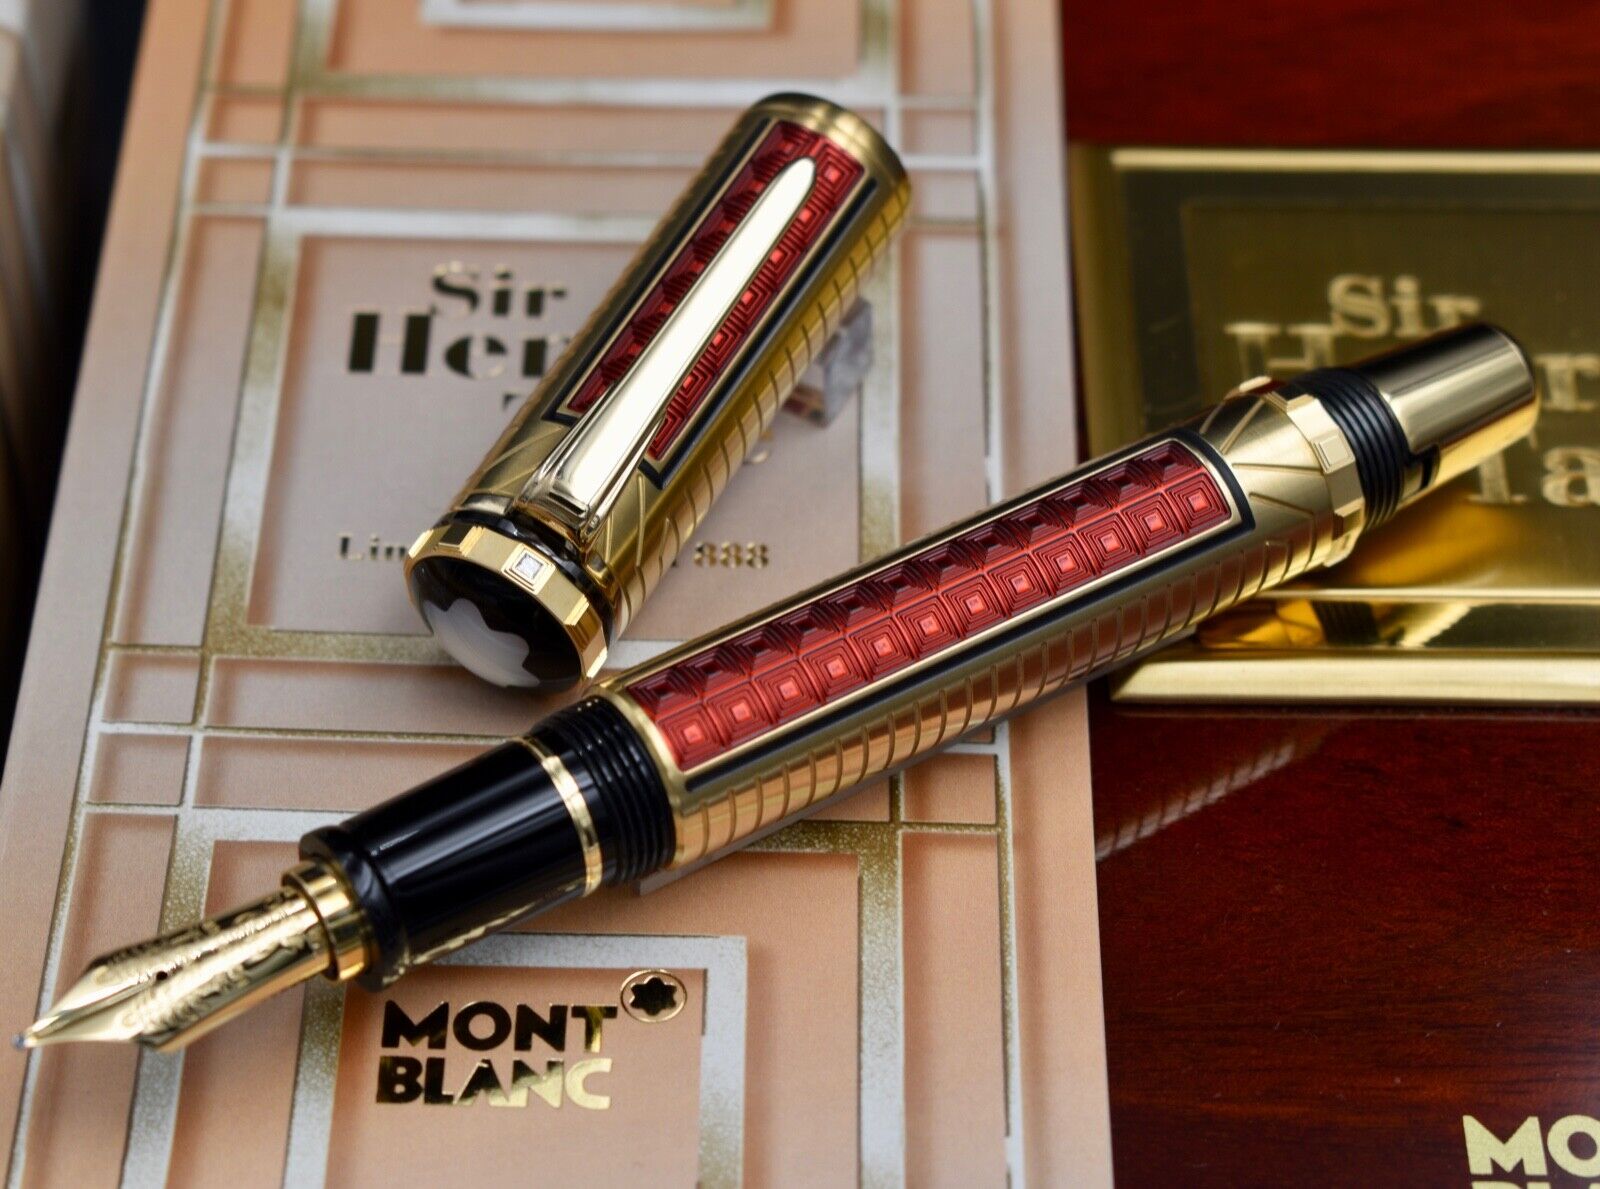 MONTBLANC 2006 Patron of Art Sir Henry Tate Limited Edition 236/888 M 